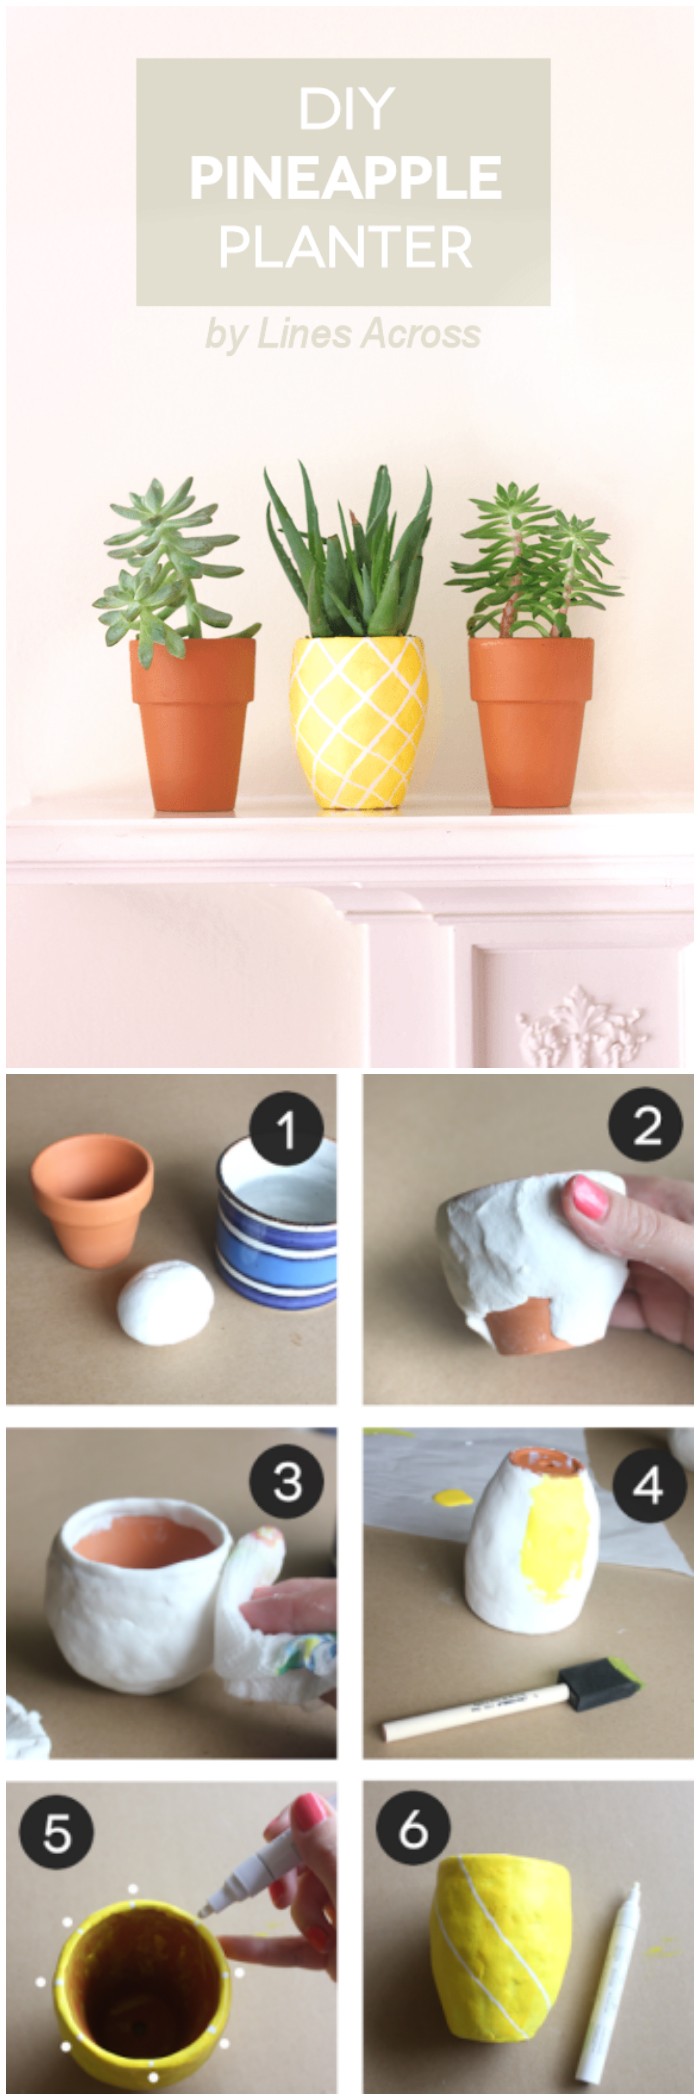 DIY Succulent Pineapple Planter Cheap DIY Projects For Your Home Decoration